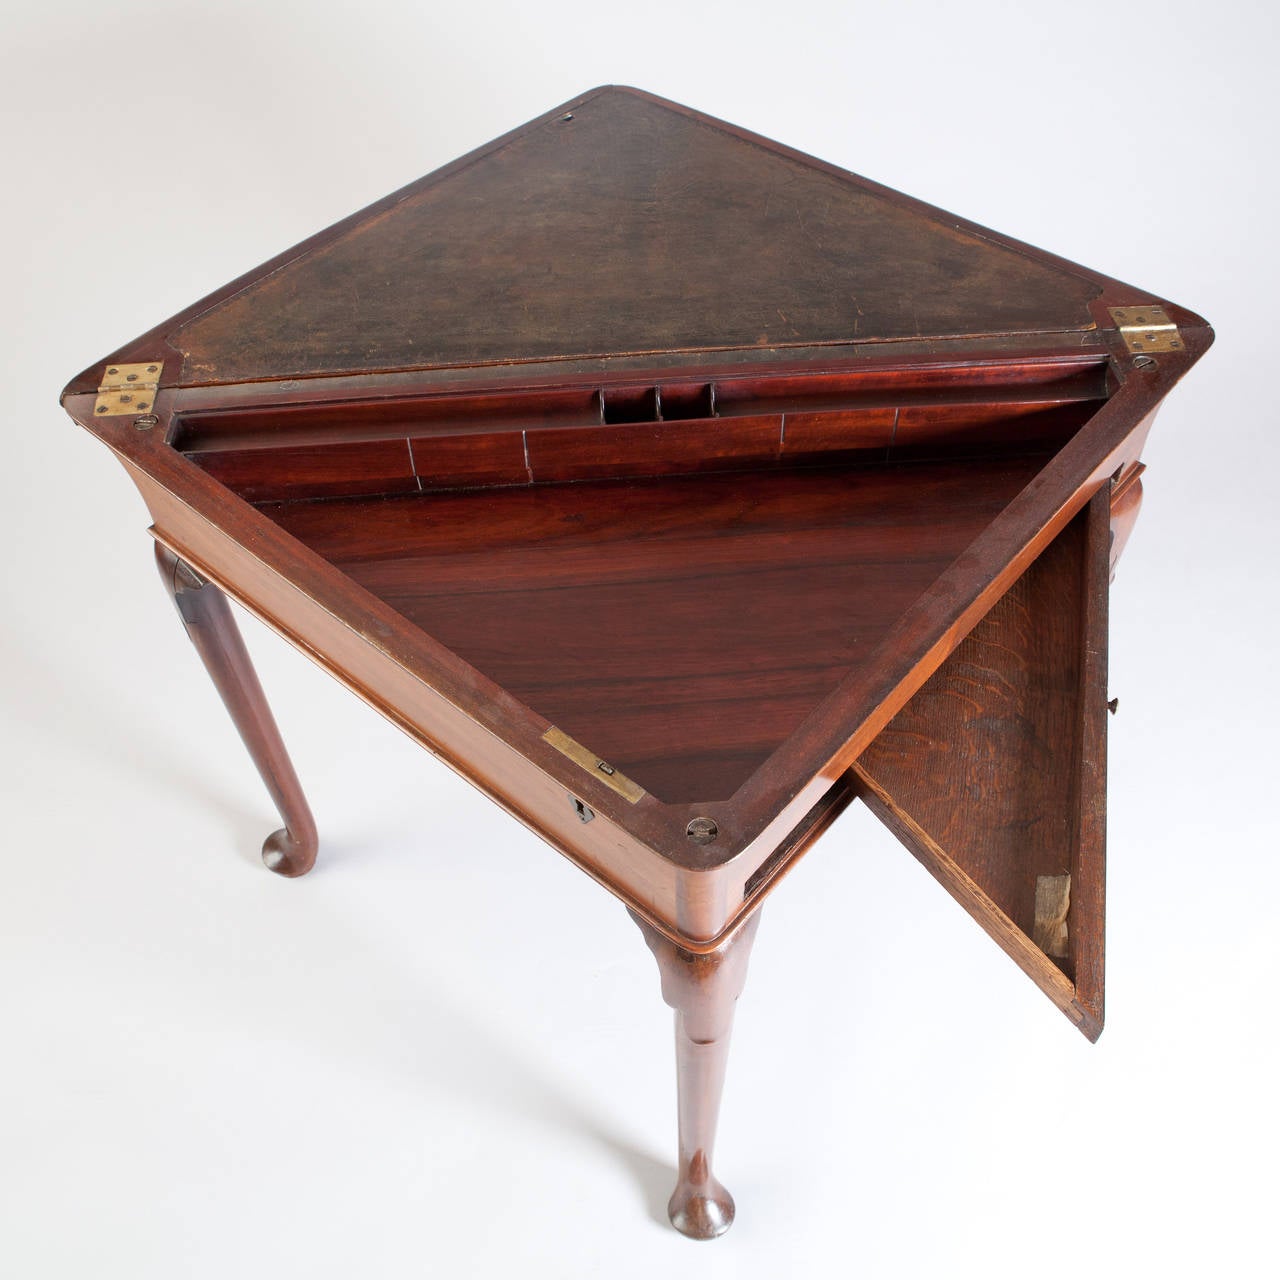 England, circa 1740.

A fine mid-18th century mahogany folding envelope / supper table, the triangular top veneered in fine mahogany inlaid with brass stringing. The lower top, opening to a fitted writing surface with leather top and sunken well.